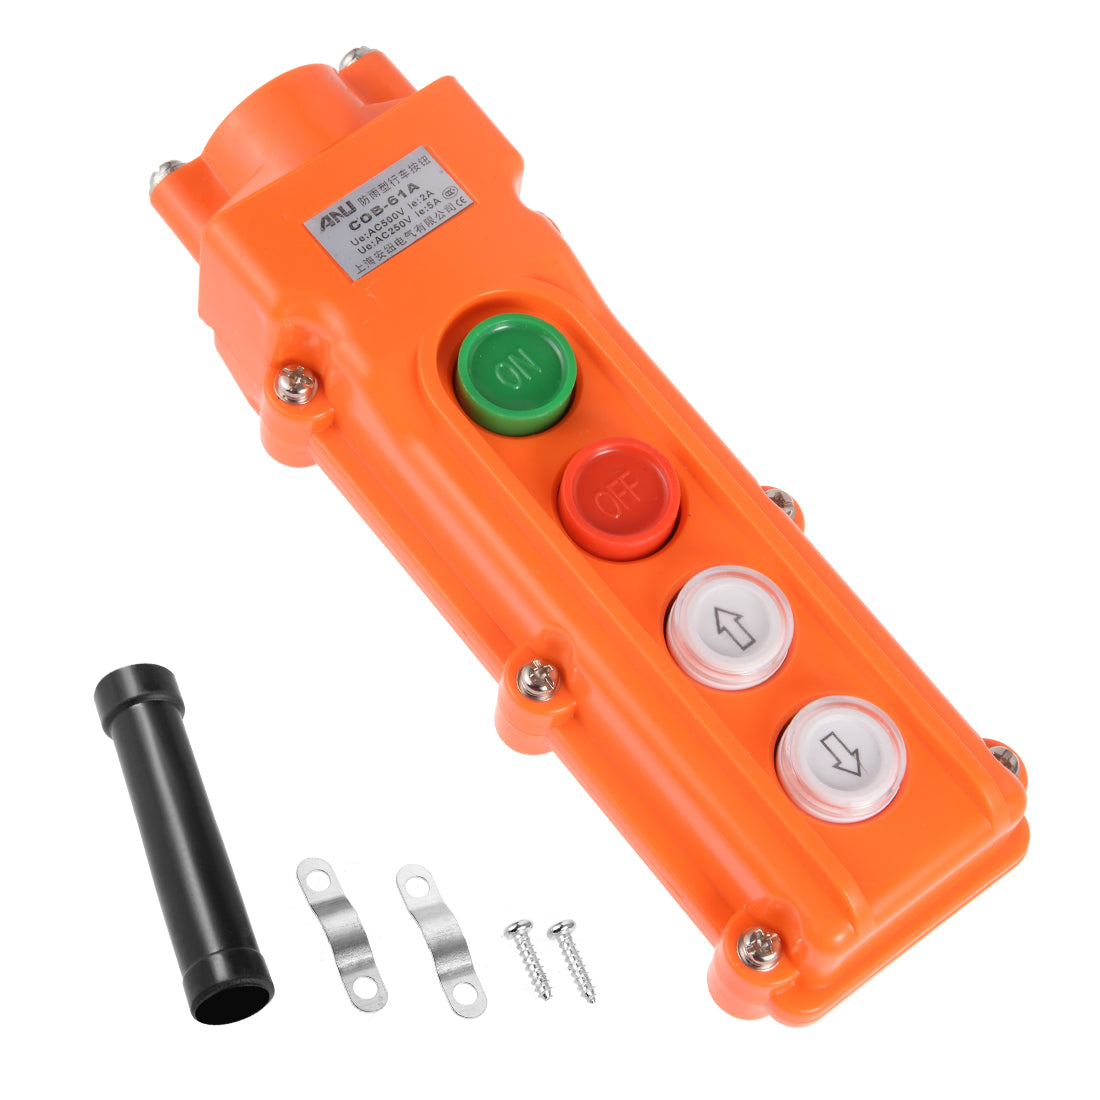 uxcell Uxcell Hoist Crane Pendant Control Station Push Button Switch Up Down On Off Orange